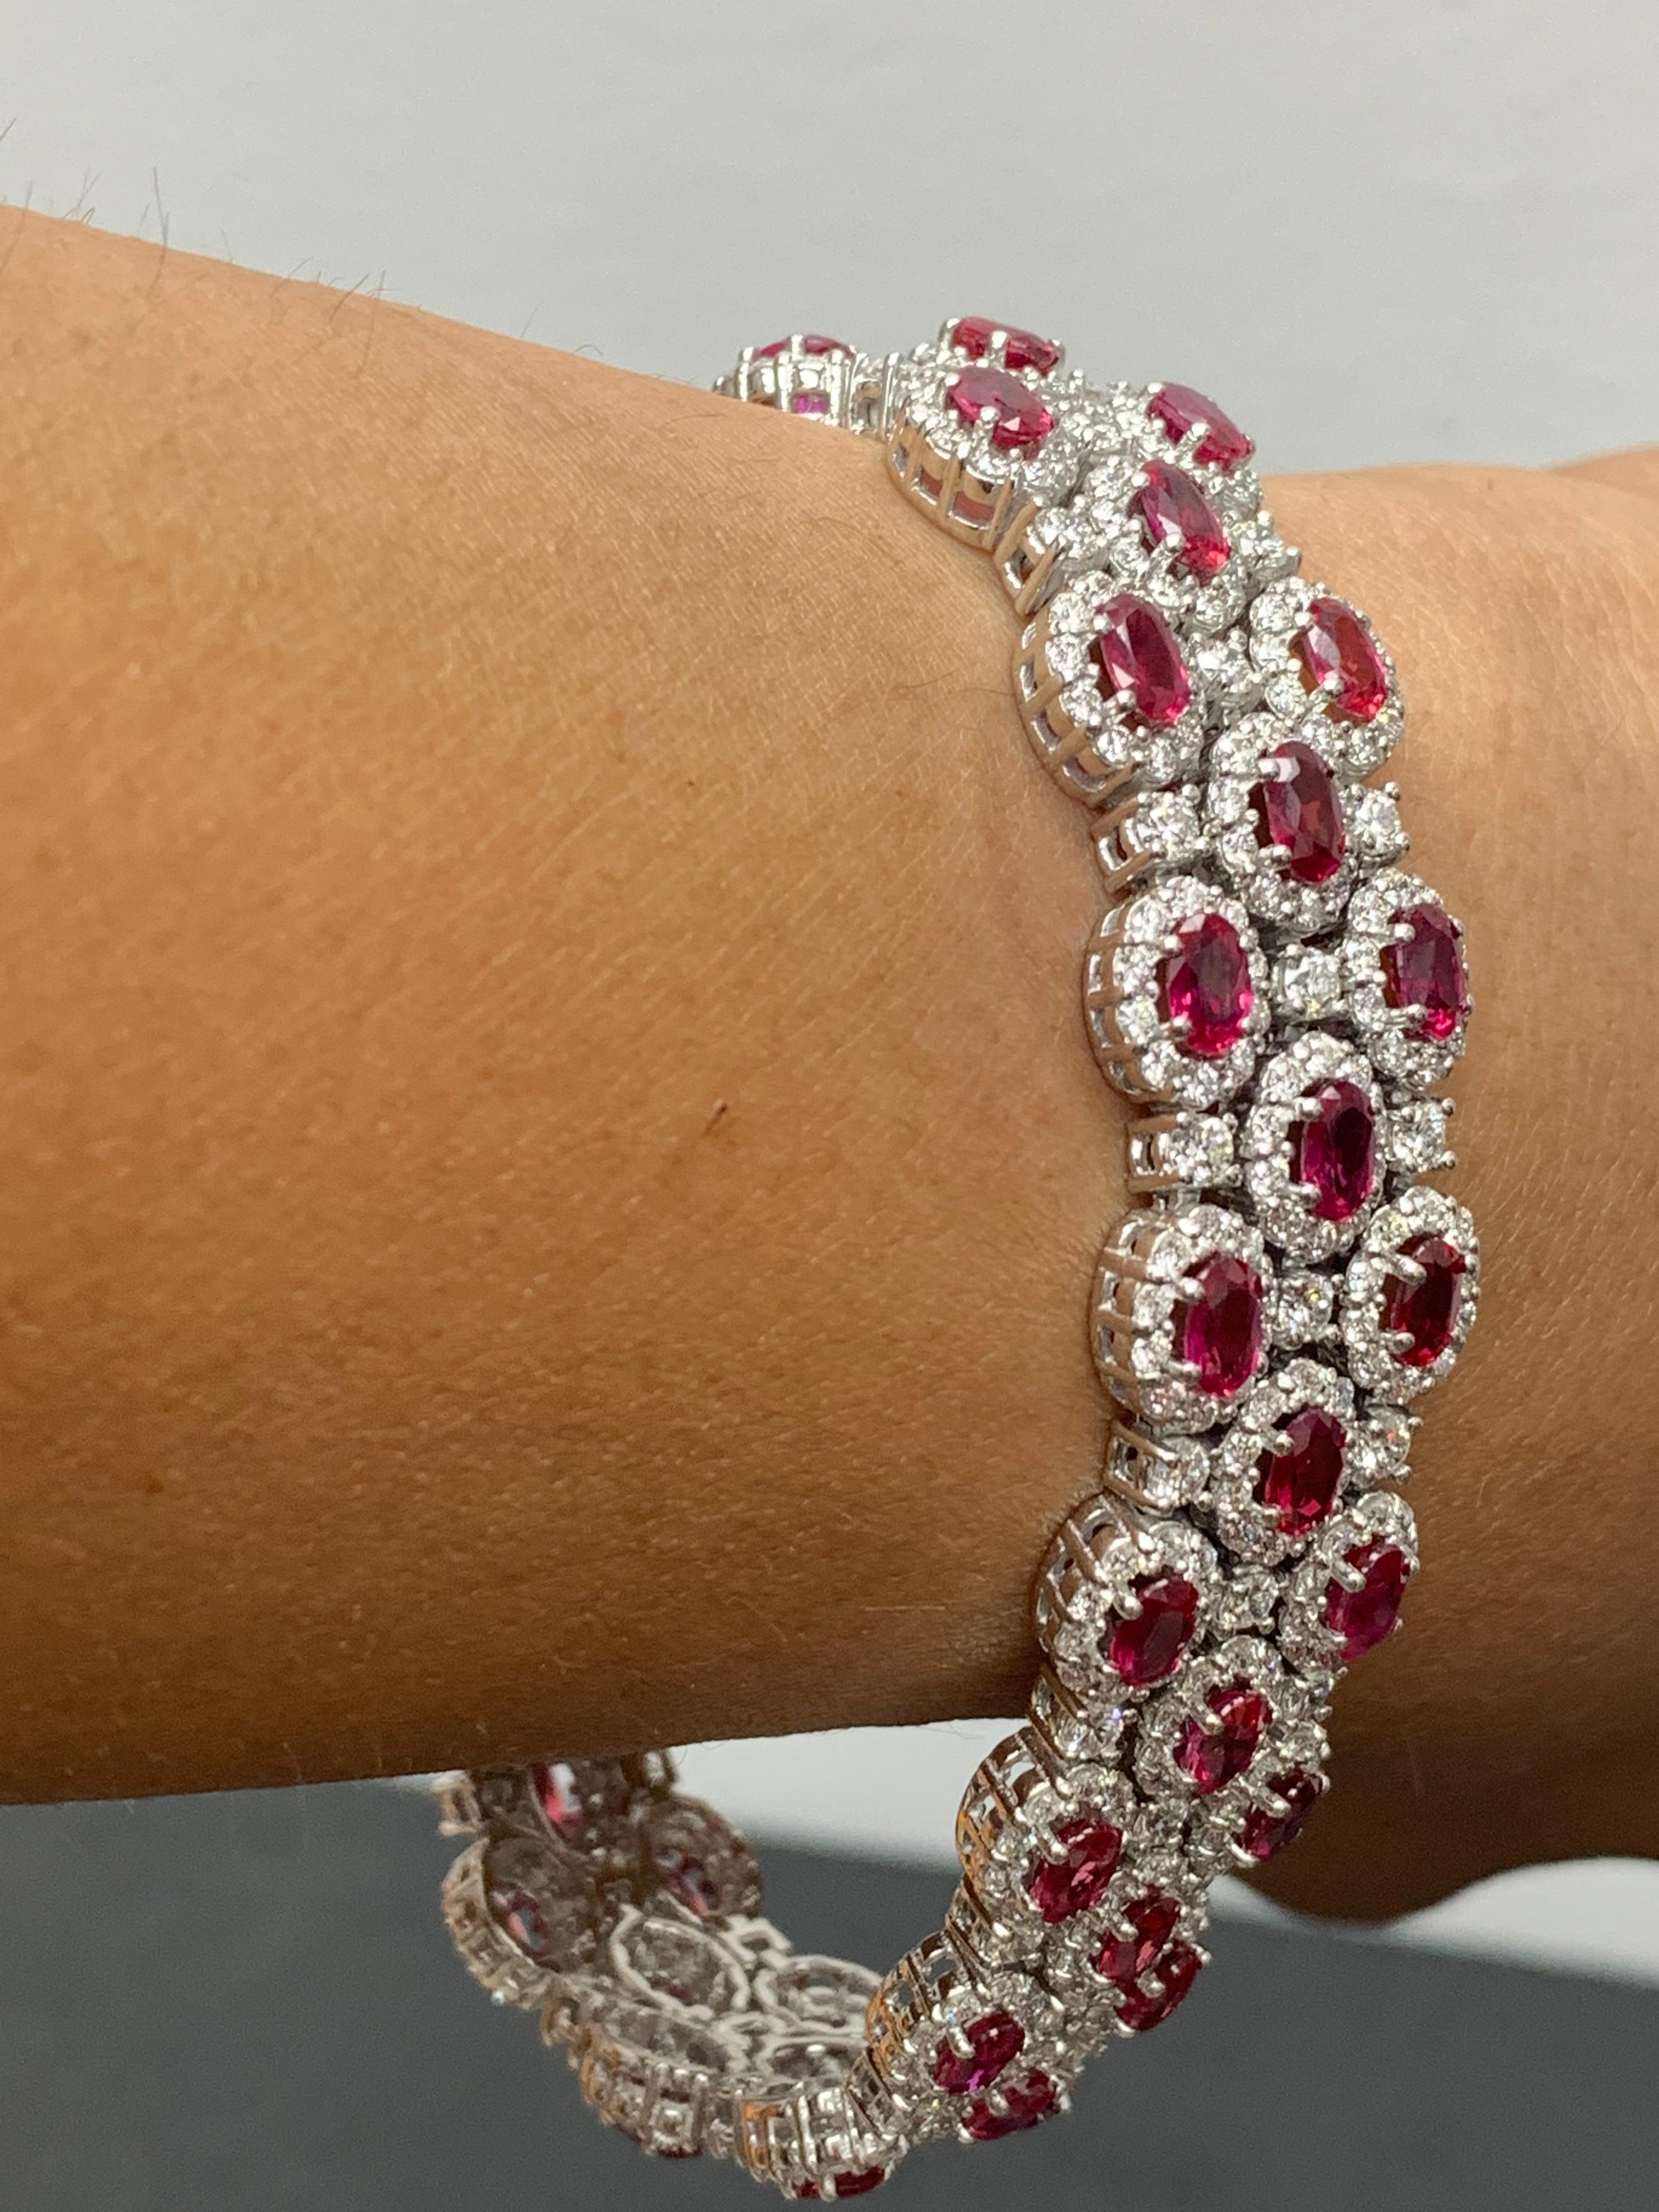 14.91 Carat Oval Cut Ruby and Diamond 3 Row Bracelet in 14K White Gold For Sale 8